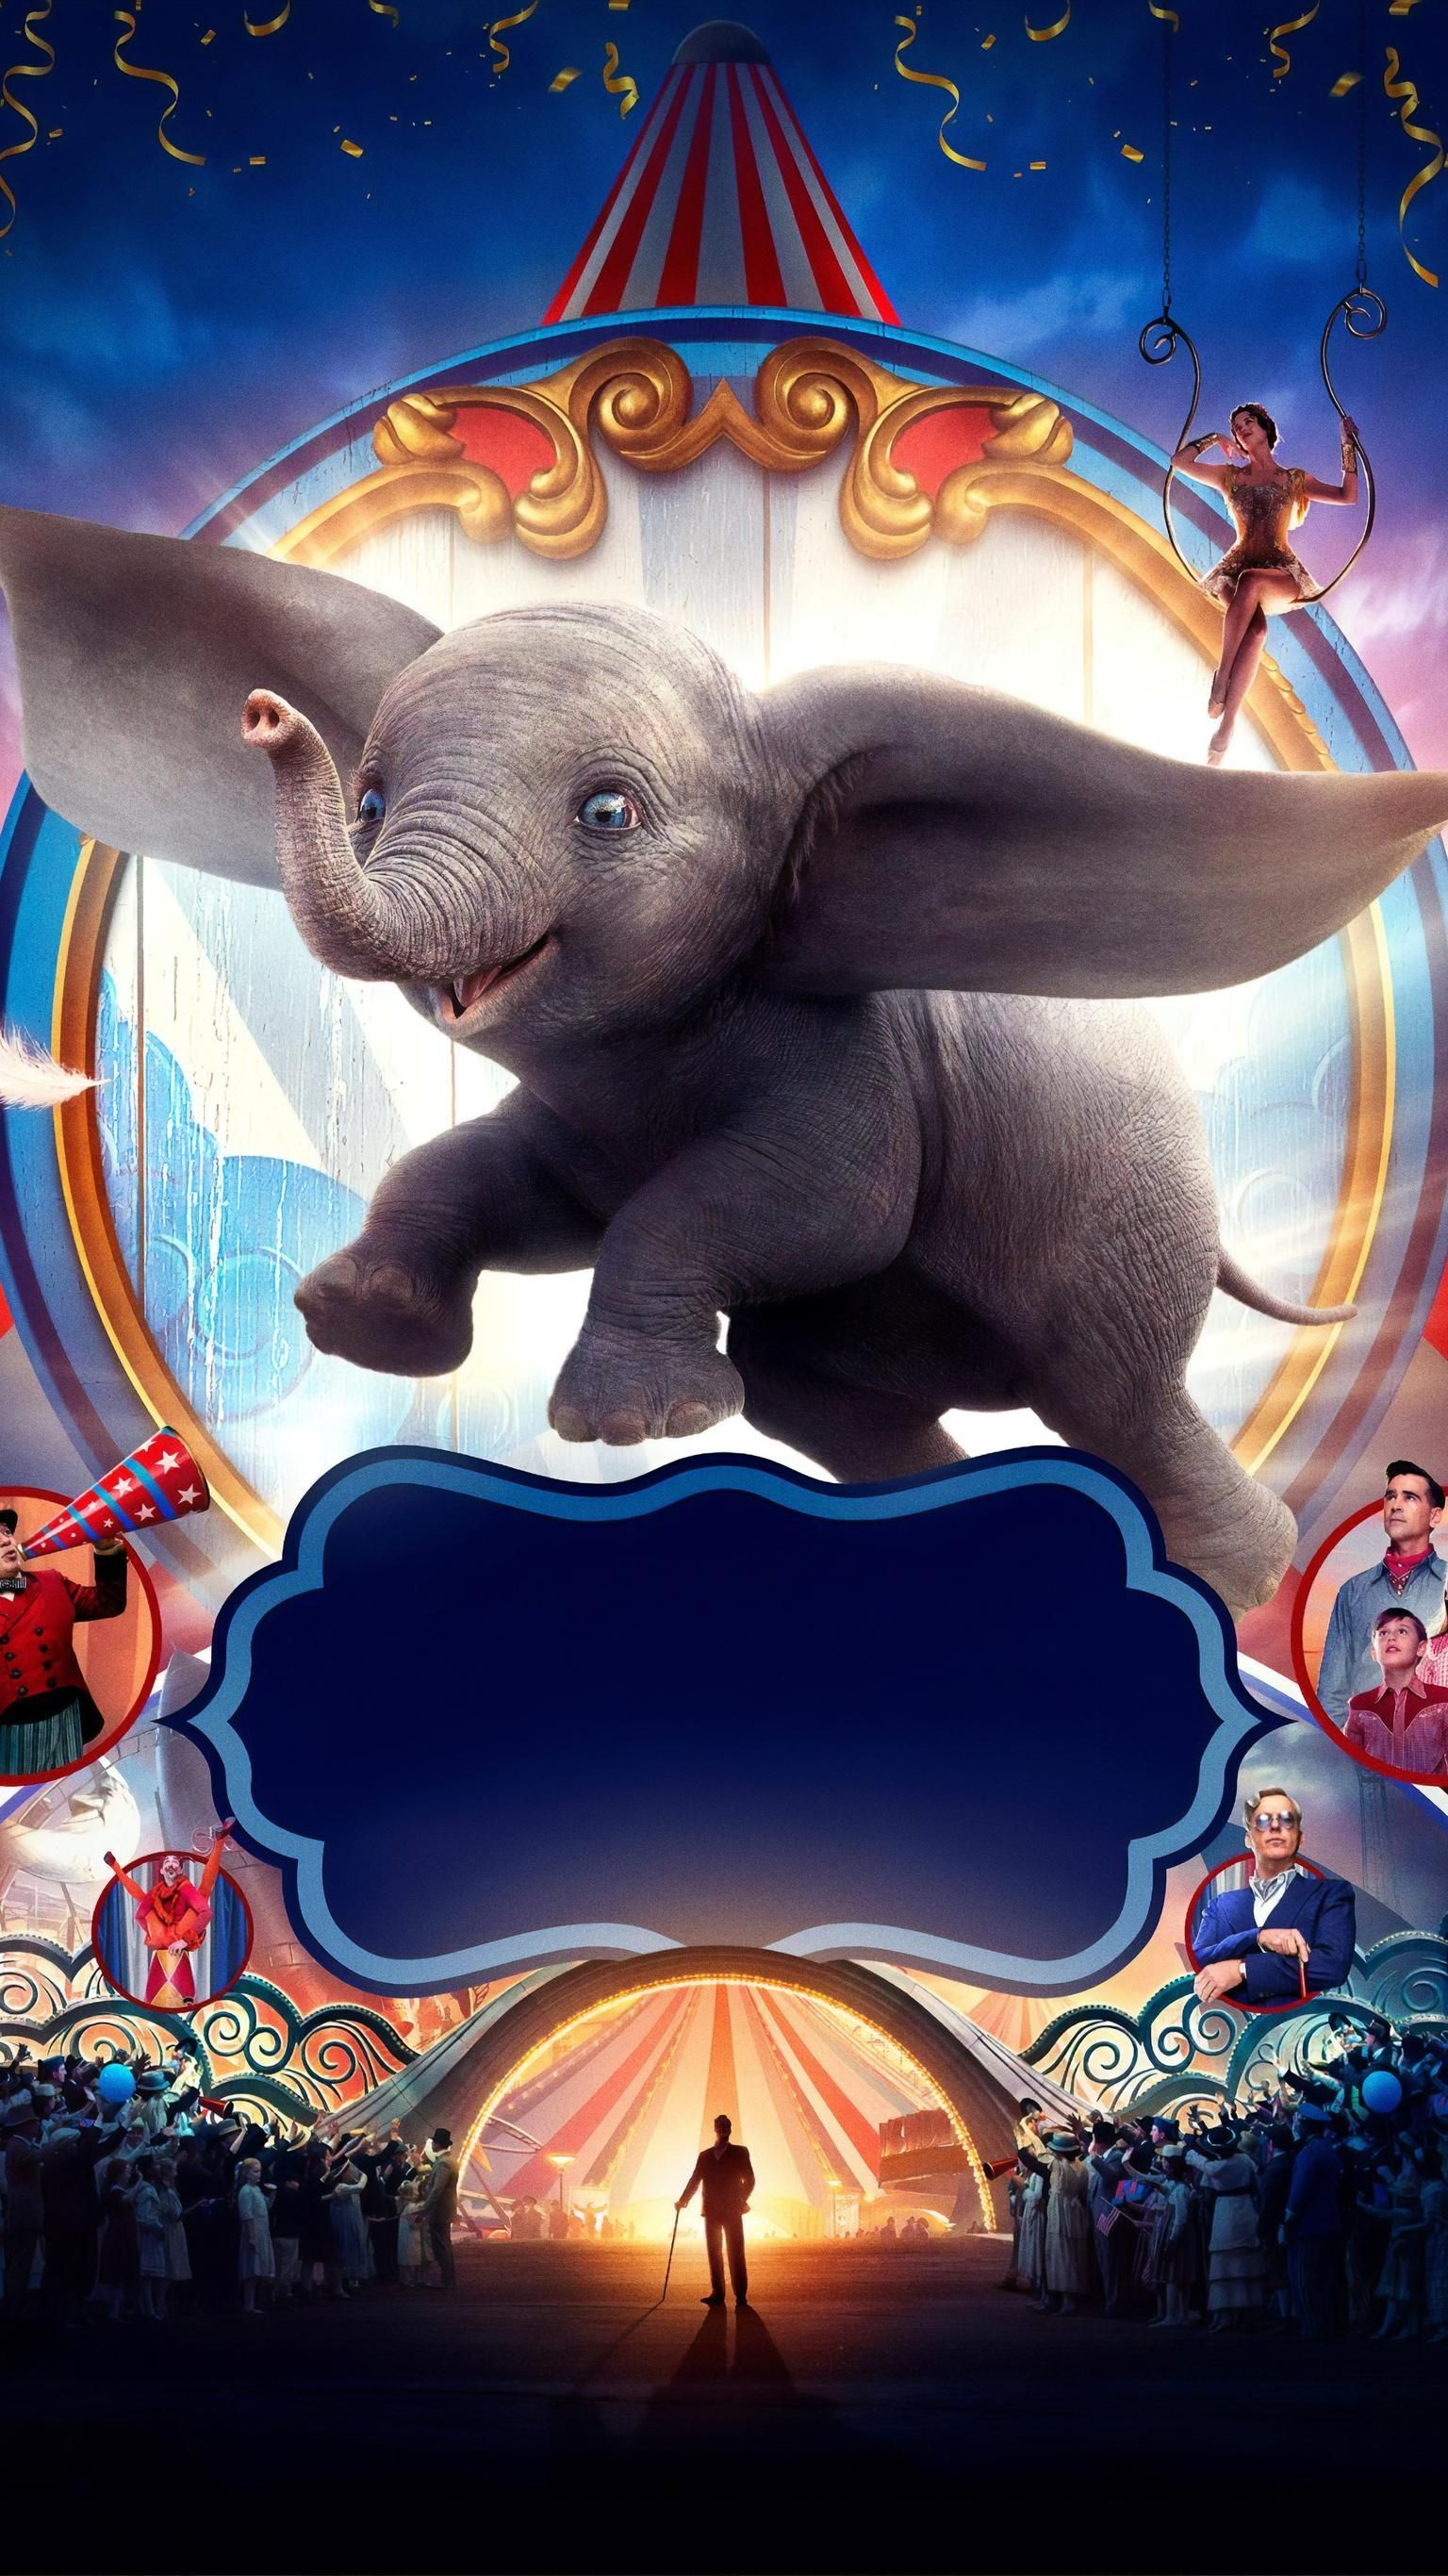 Dumbo Movie Wallpapers - Wallpaper Cave